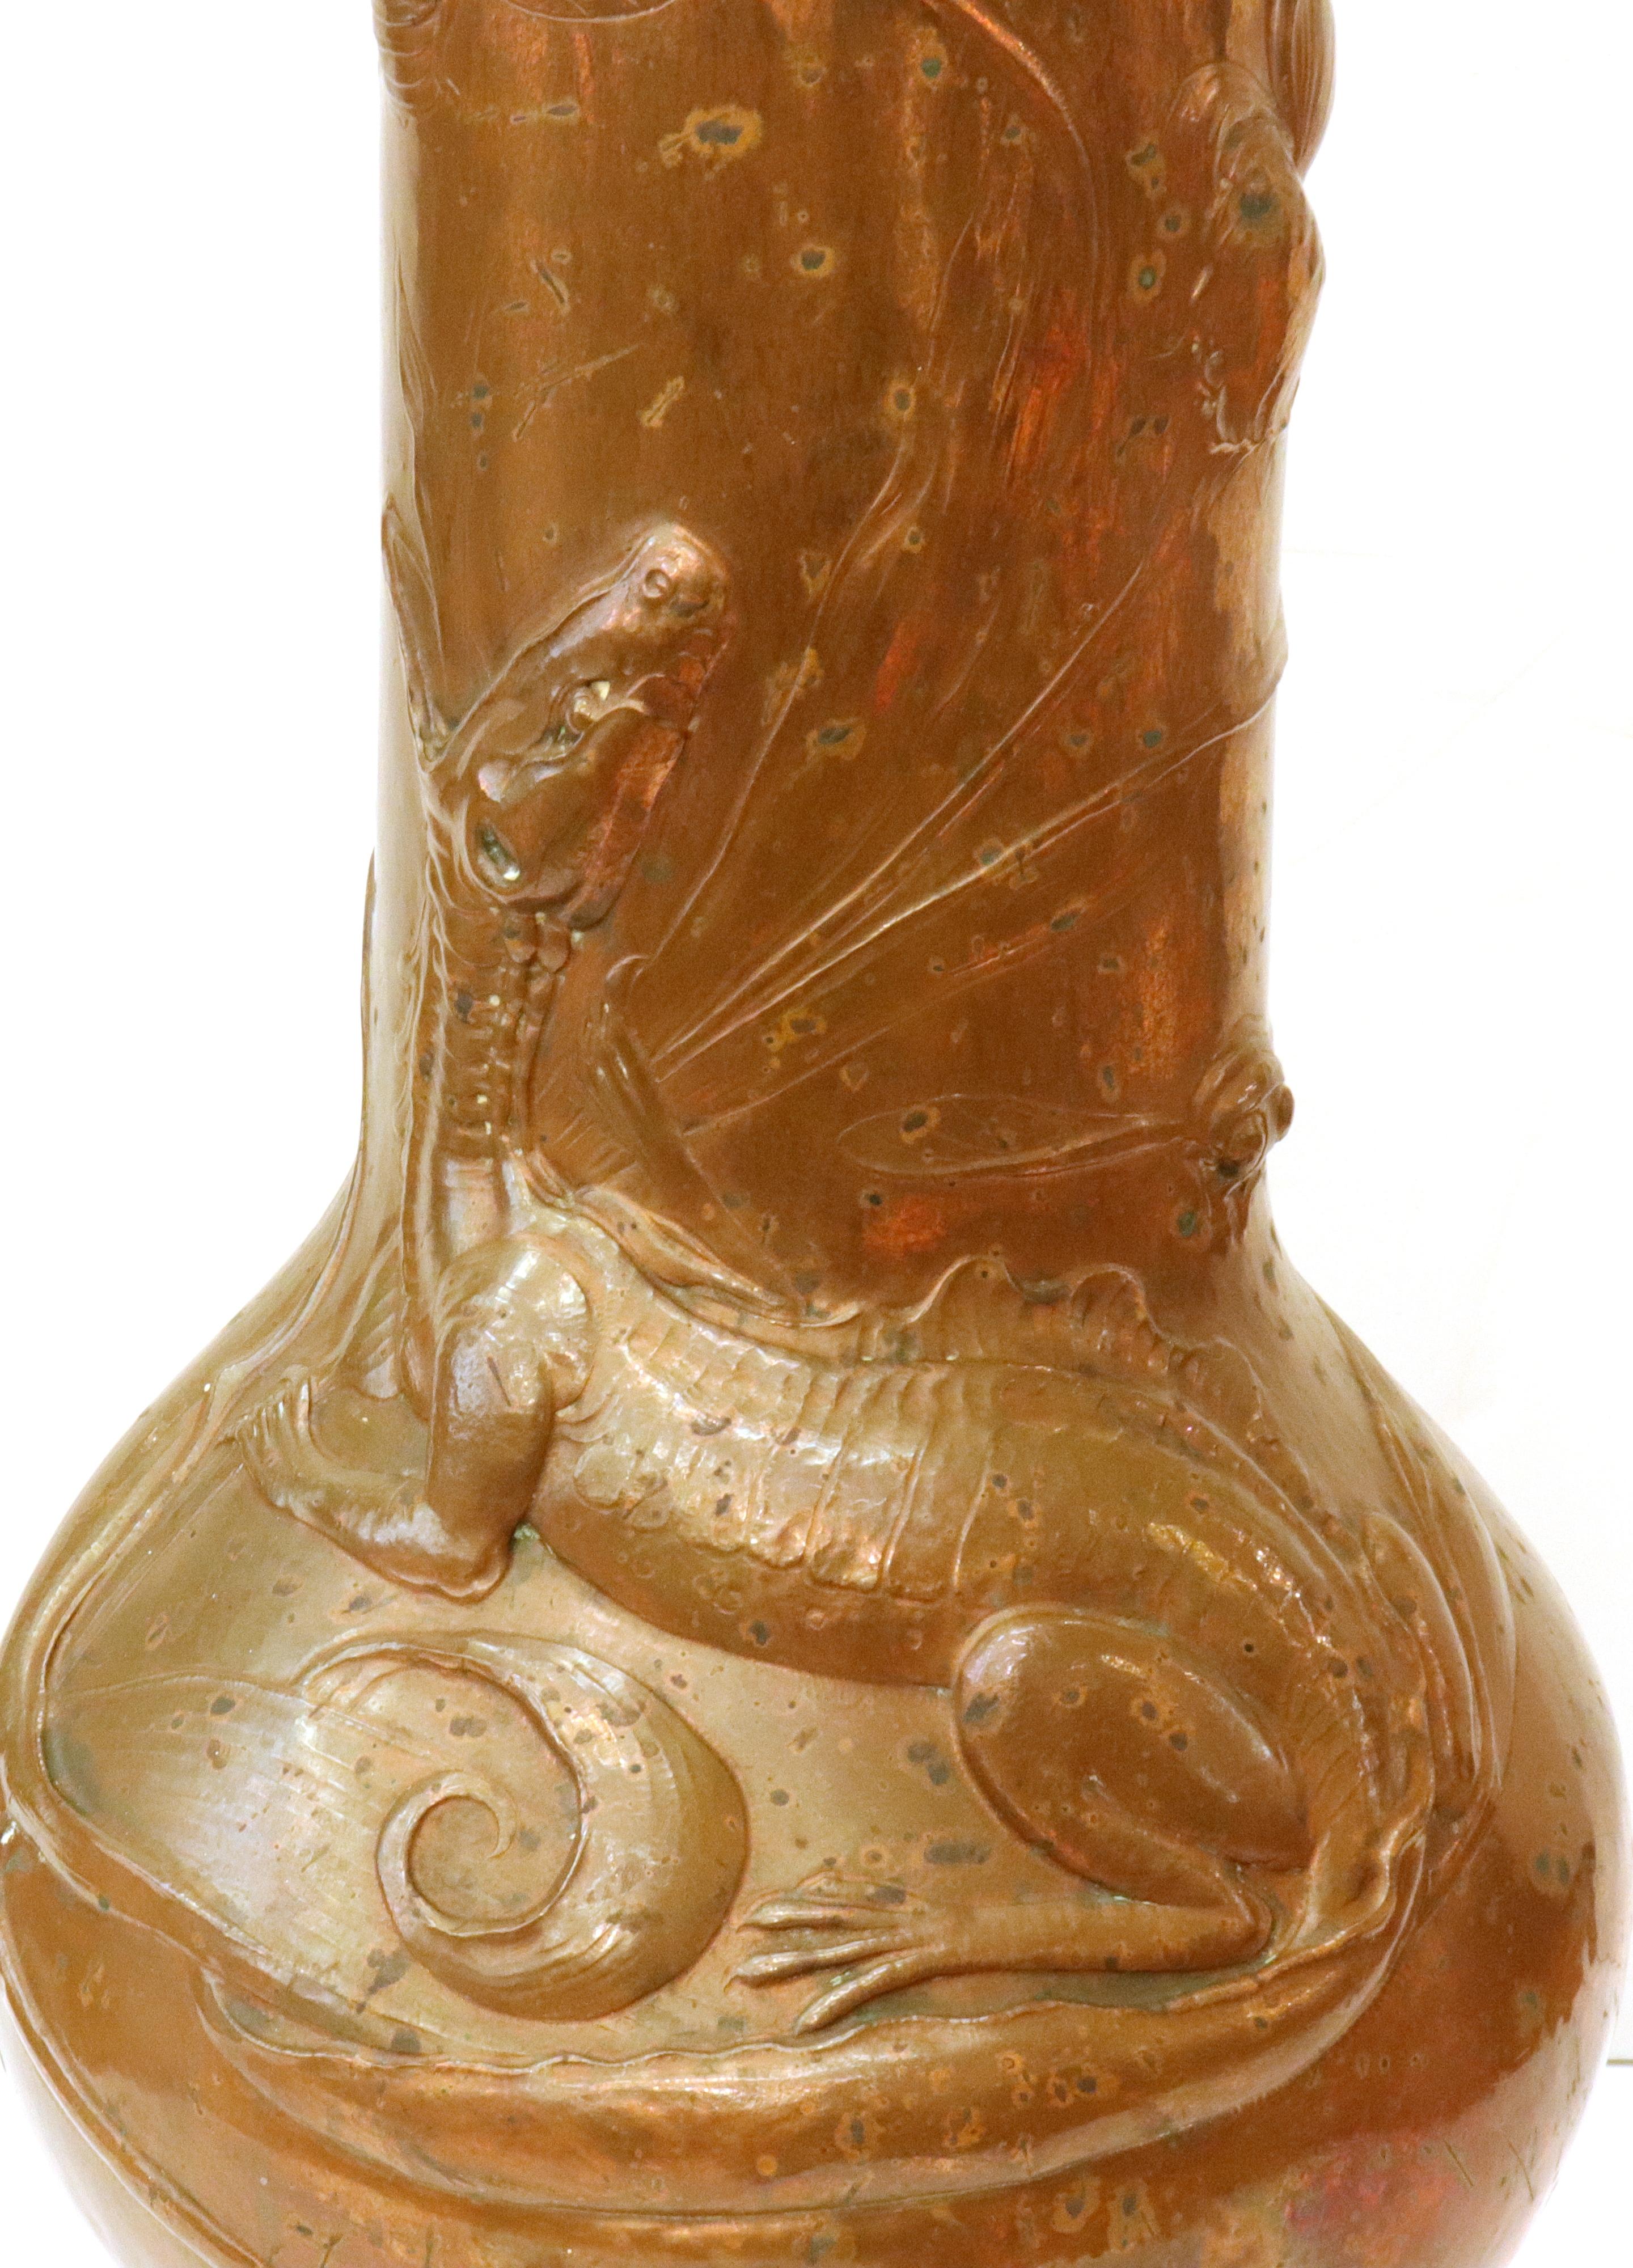 German Jugendstil monumental vase designed by Ludwig Karl Maria Vierthaler and made of repousse copper with a brass rim. The piece has a large lizard on the front as well as a dragonfly and some floral elements. Made in Germany during the early